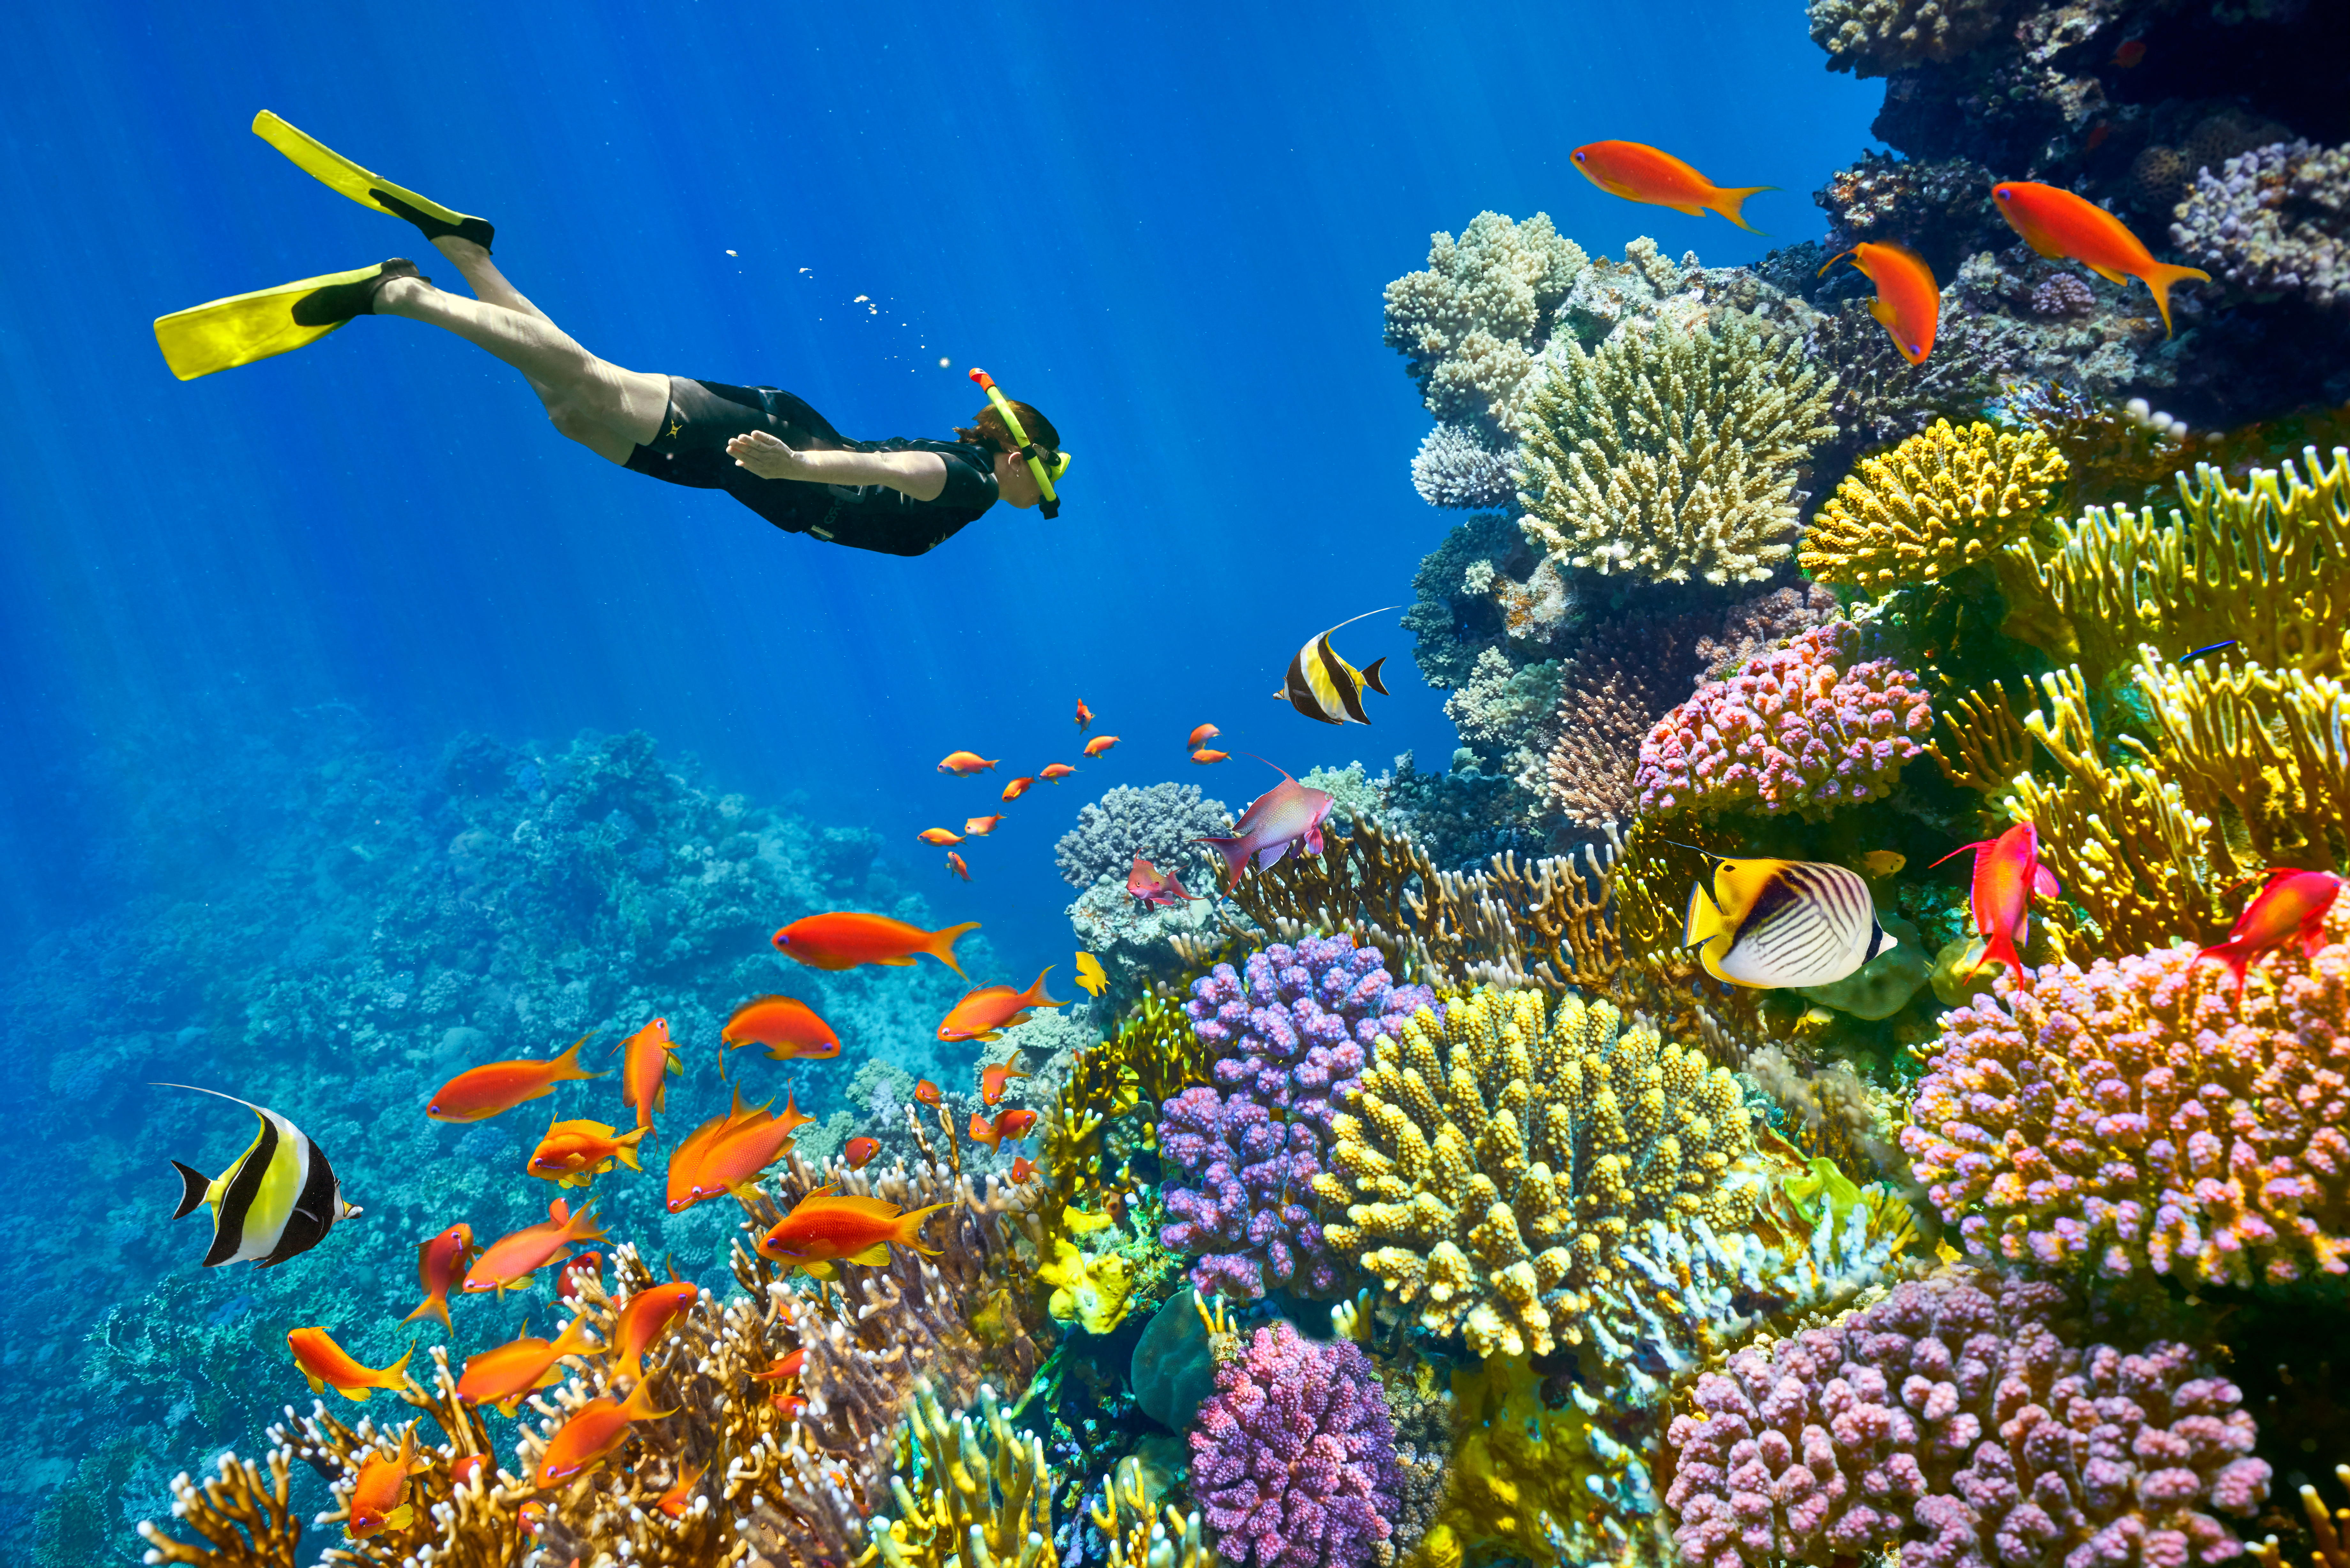 Set beside the Red Sea’s crystalline waters, Sharm is the perfect destination for both relaxation and adventure